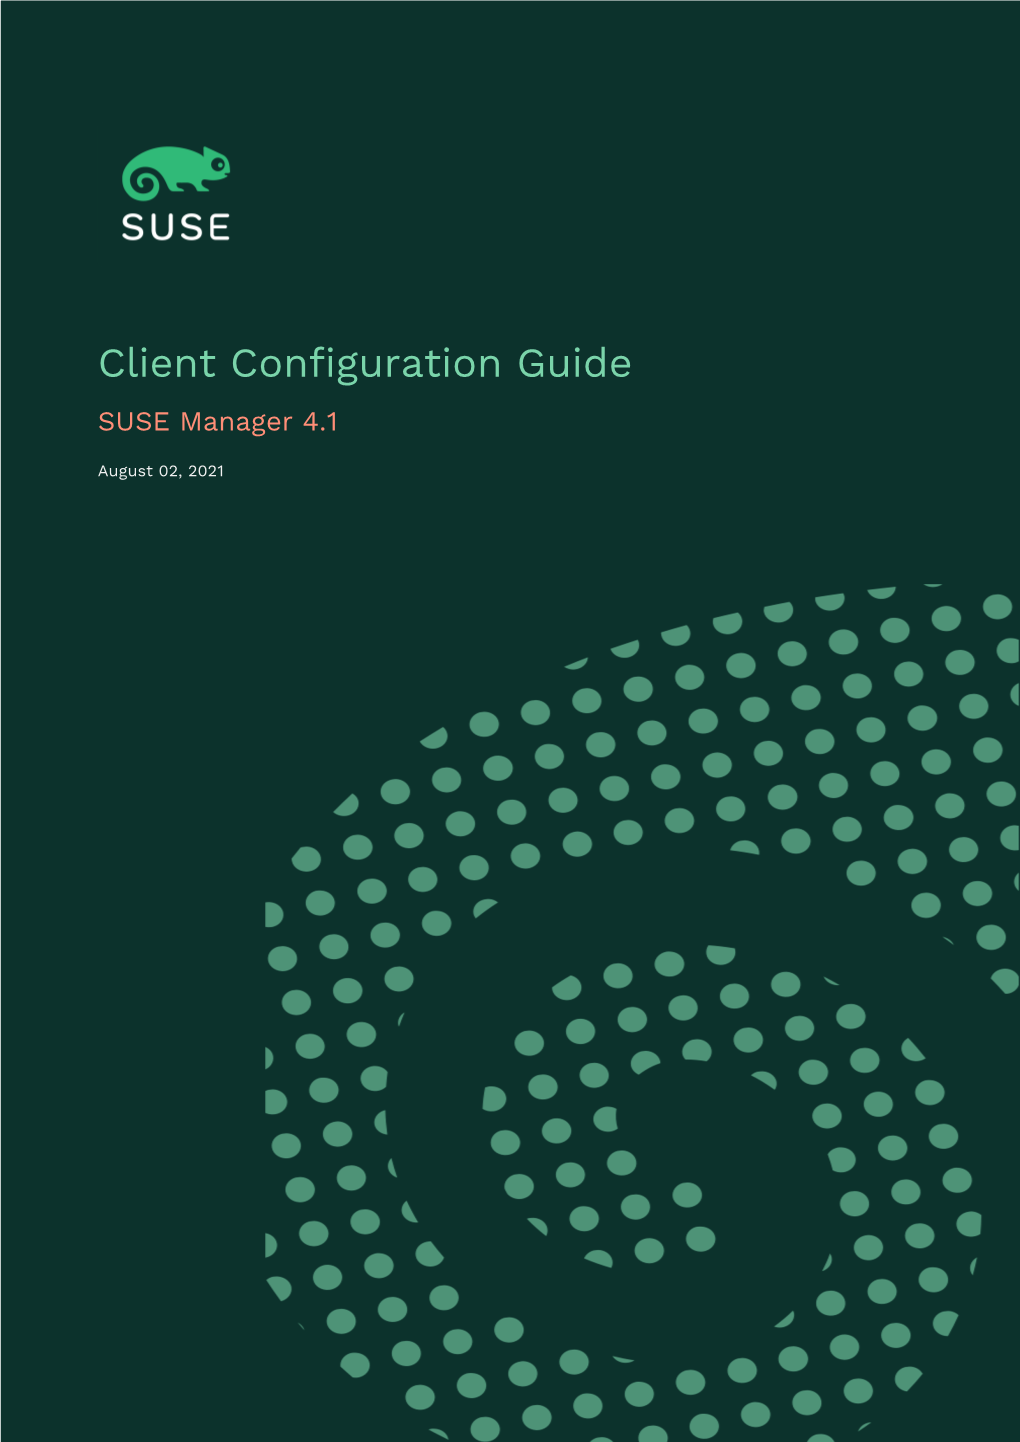 Client Configuration Guide: SUSE Manager